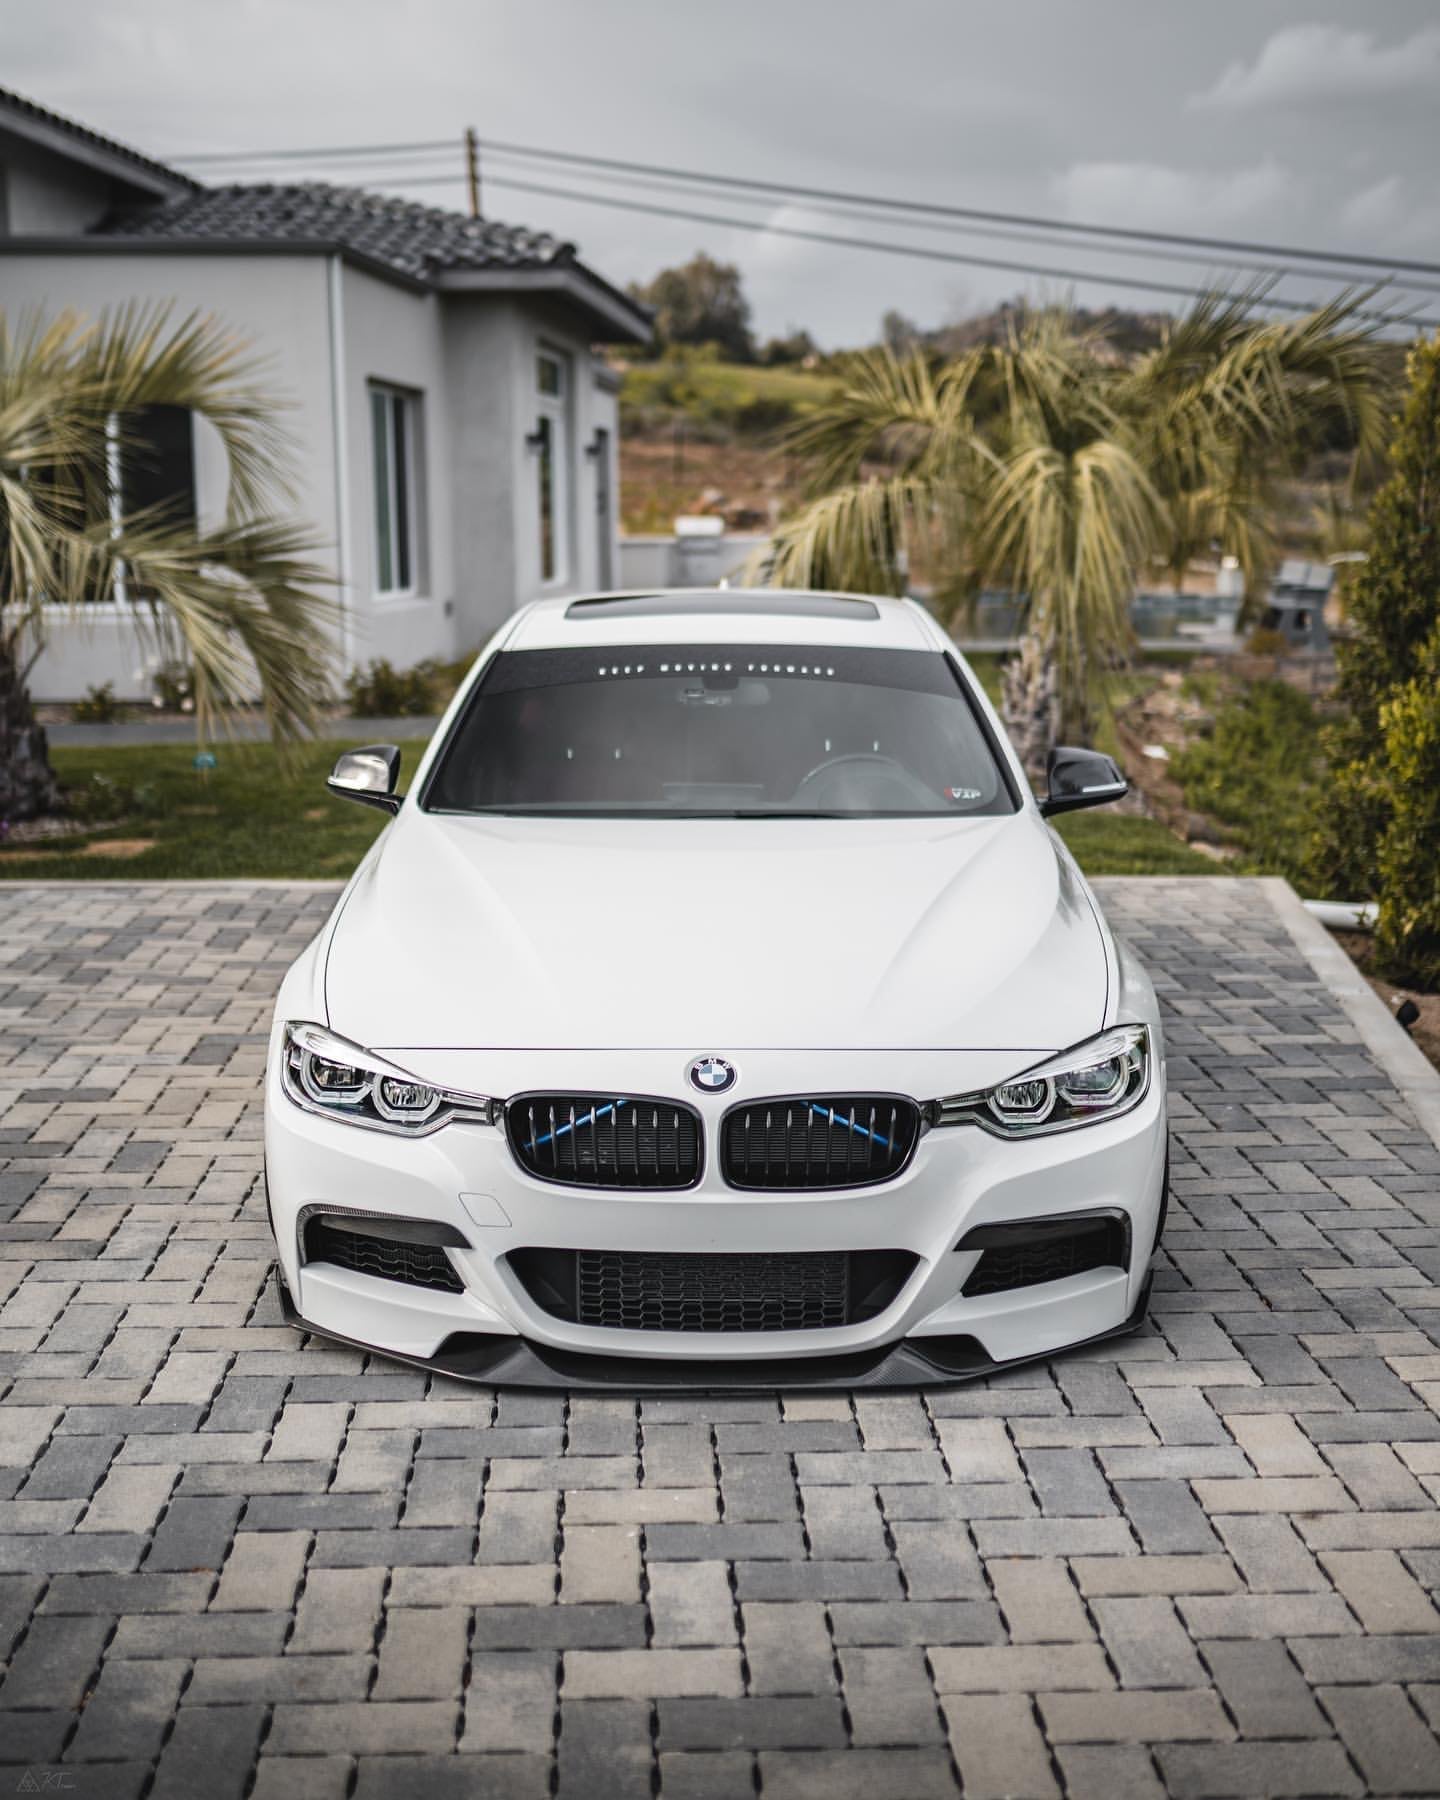 MStyle 1 piece carbon front splitter for all F30/31 pre LCI se models